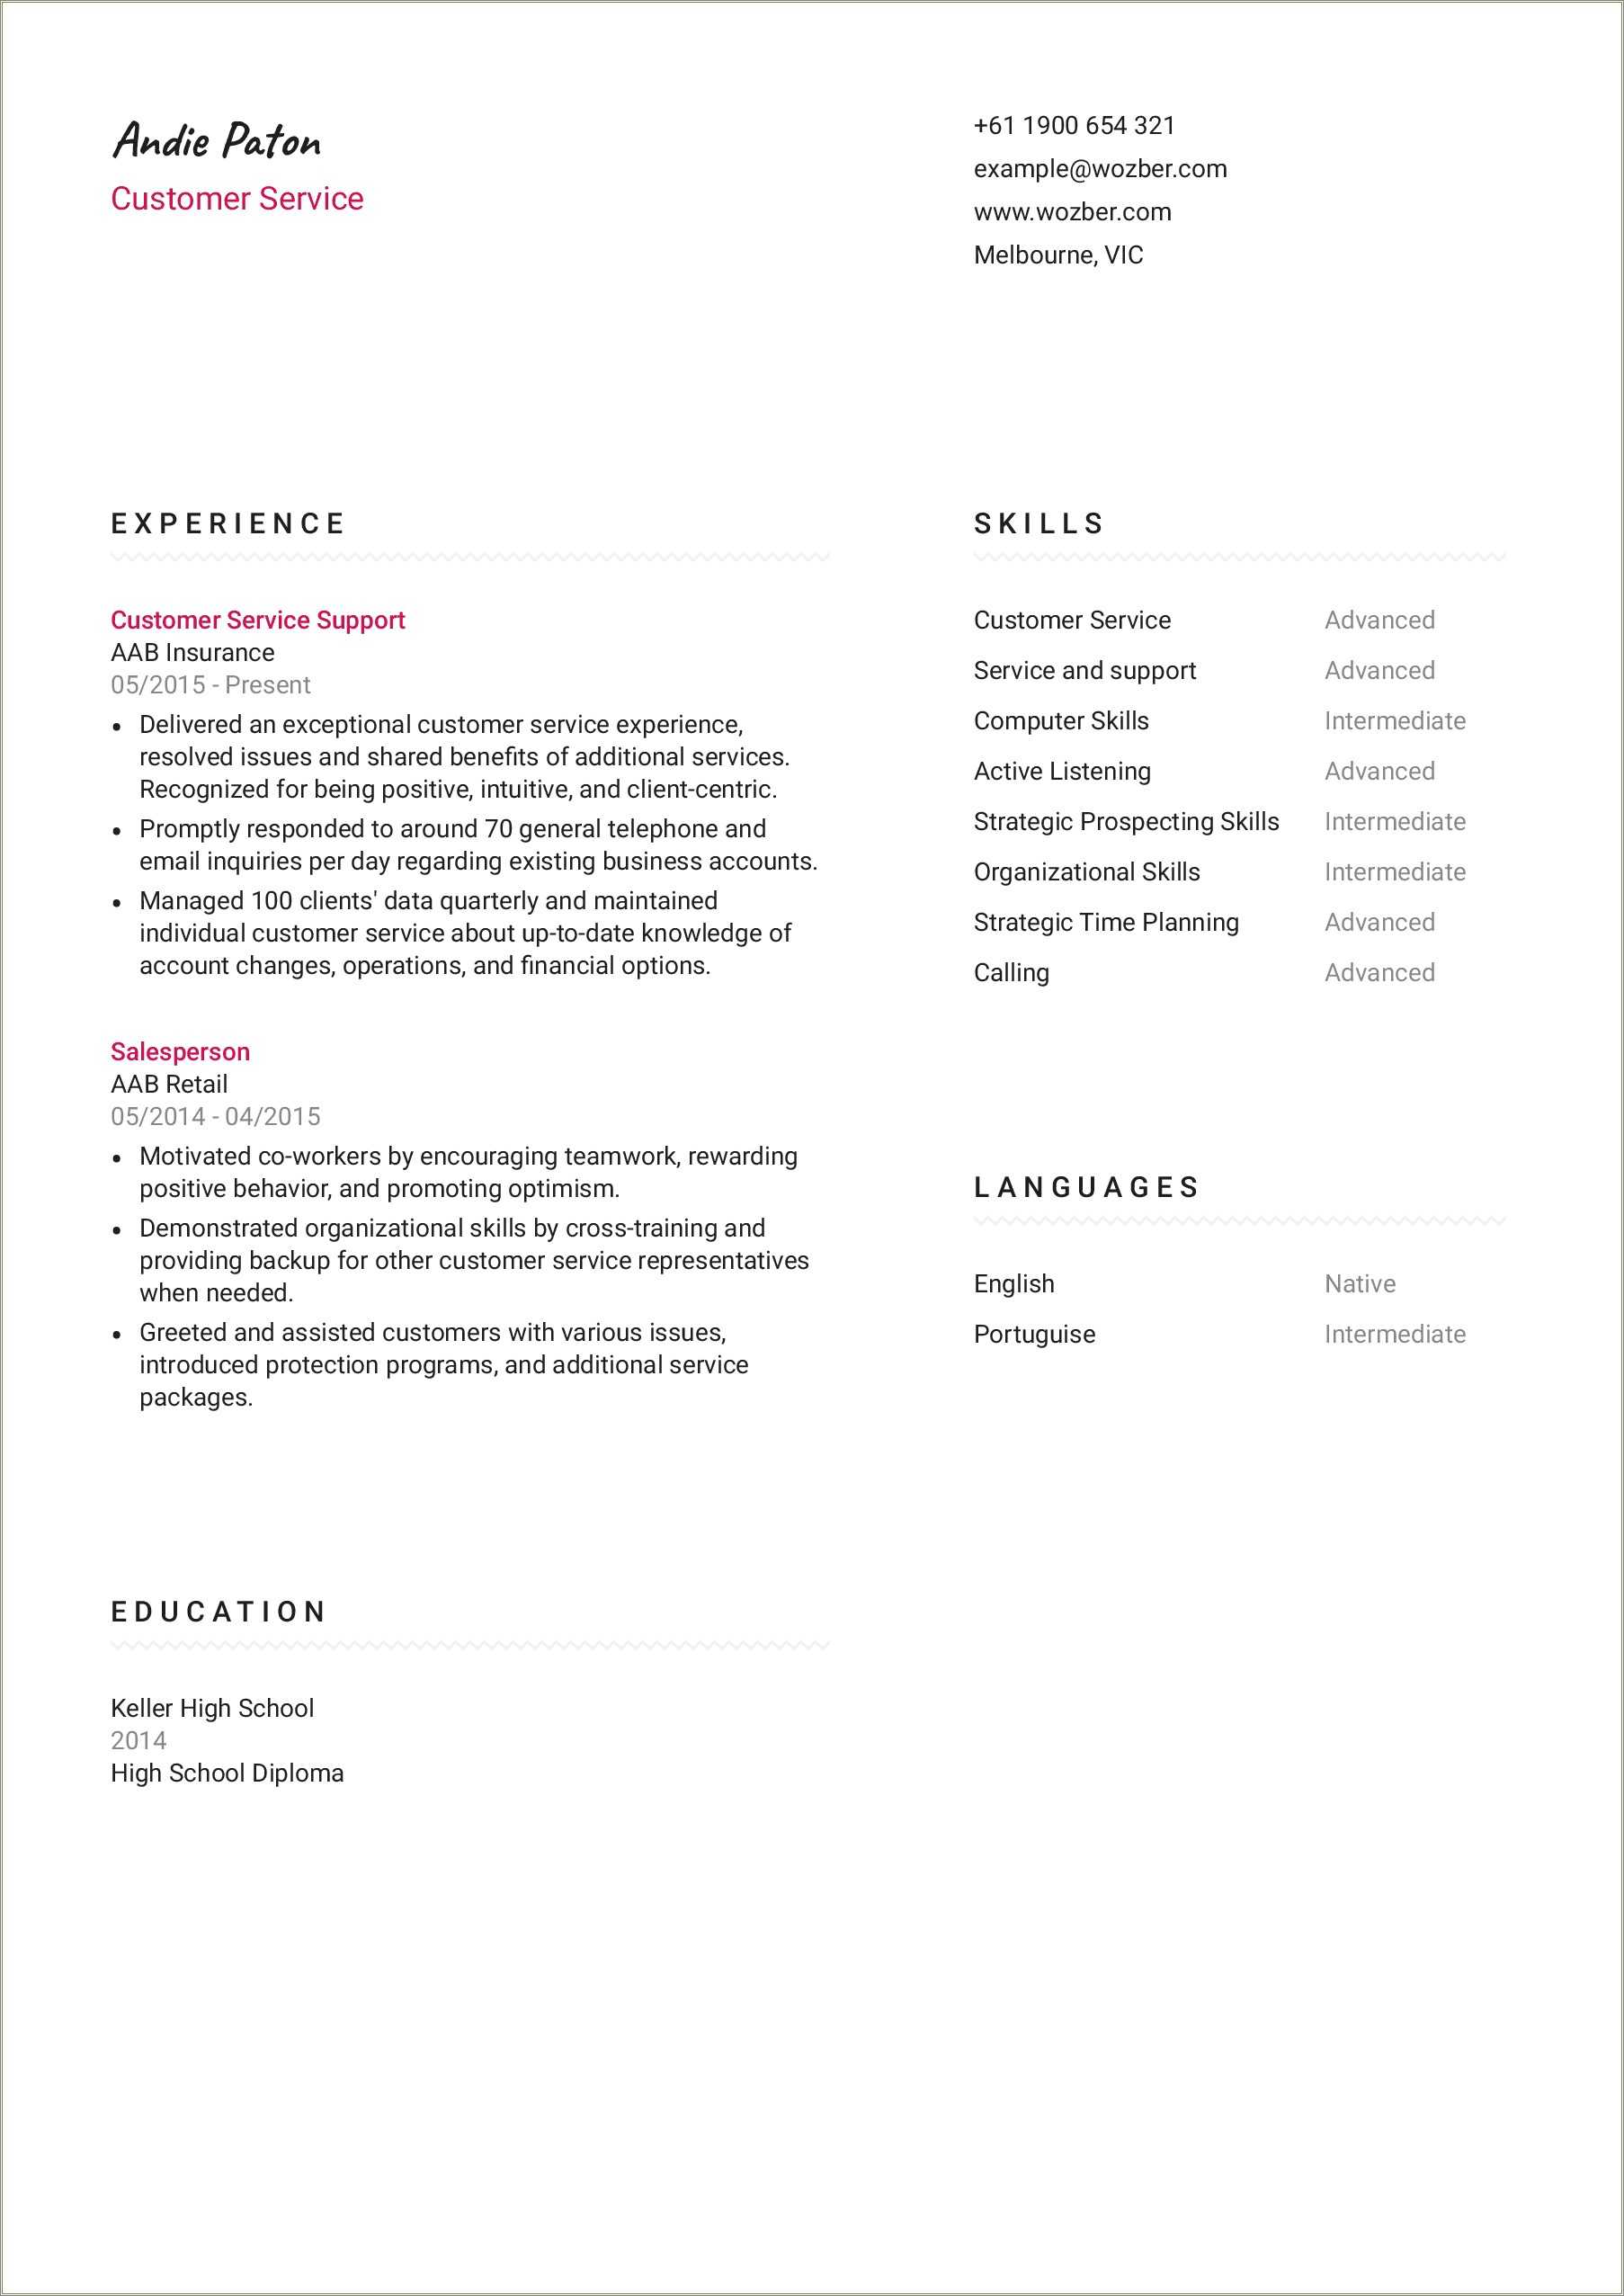 Examples Of Computer Skills And Abilities For Resume